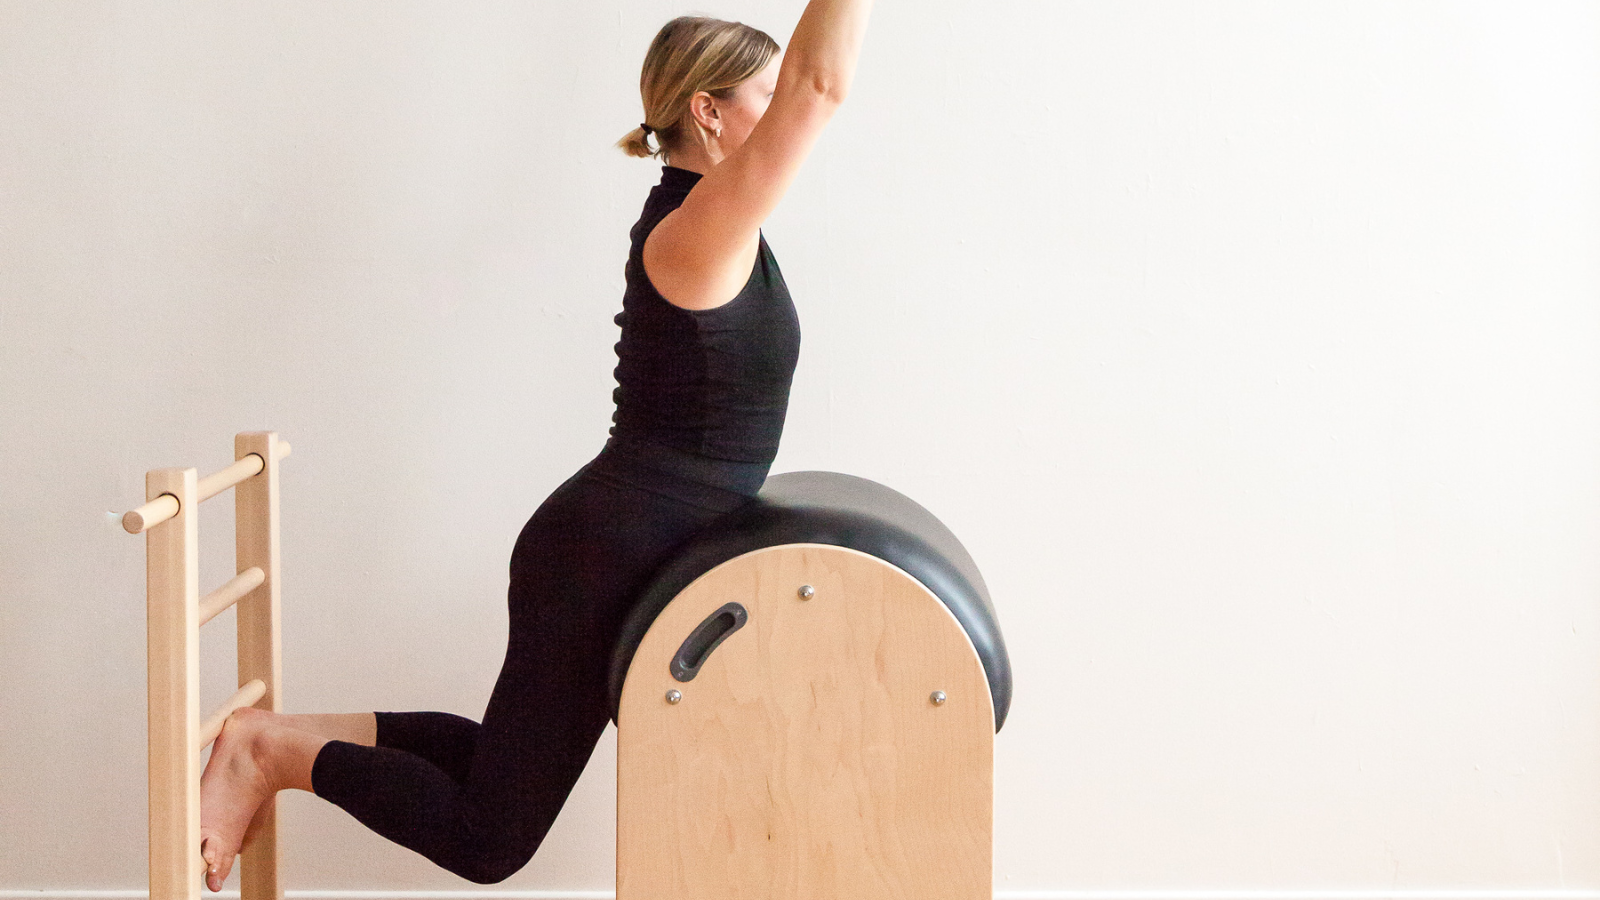 Pilates Equipment for Home: 4 Must-Haves and How to Use Them